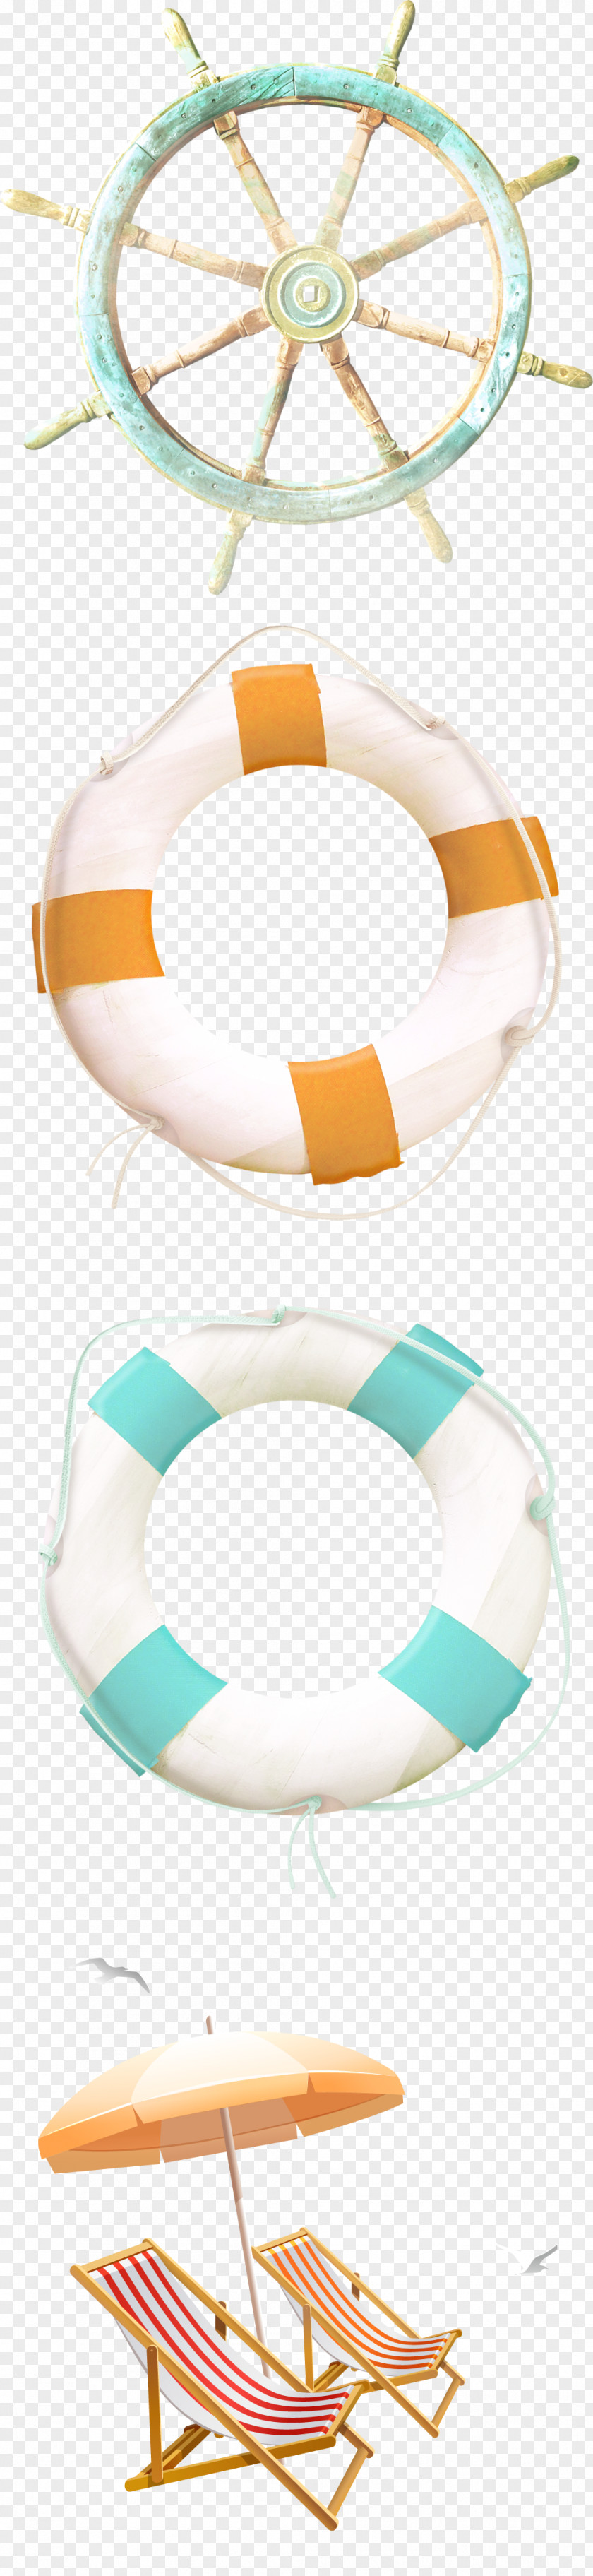 Swim Rings And Recreational Seats Illustration PNG